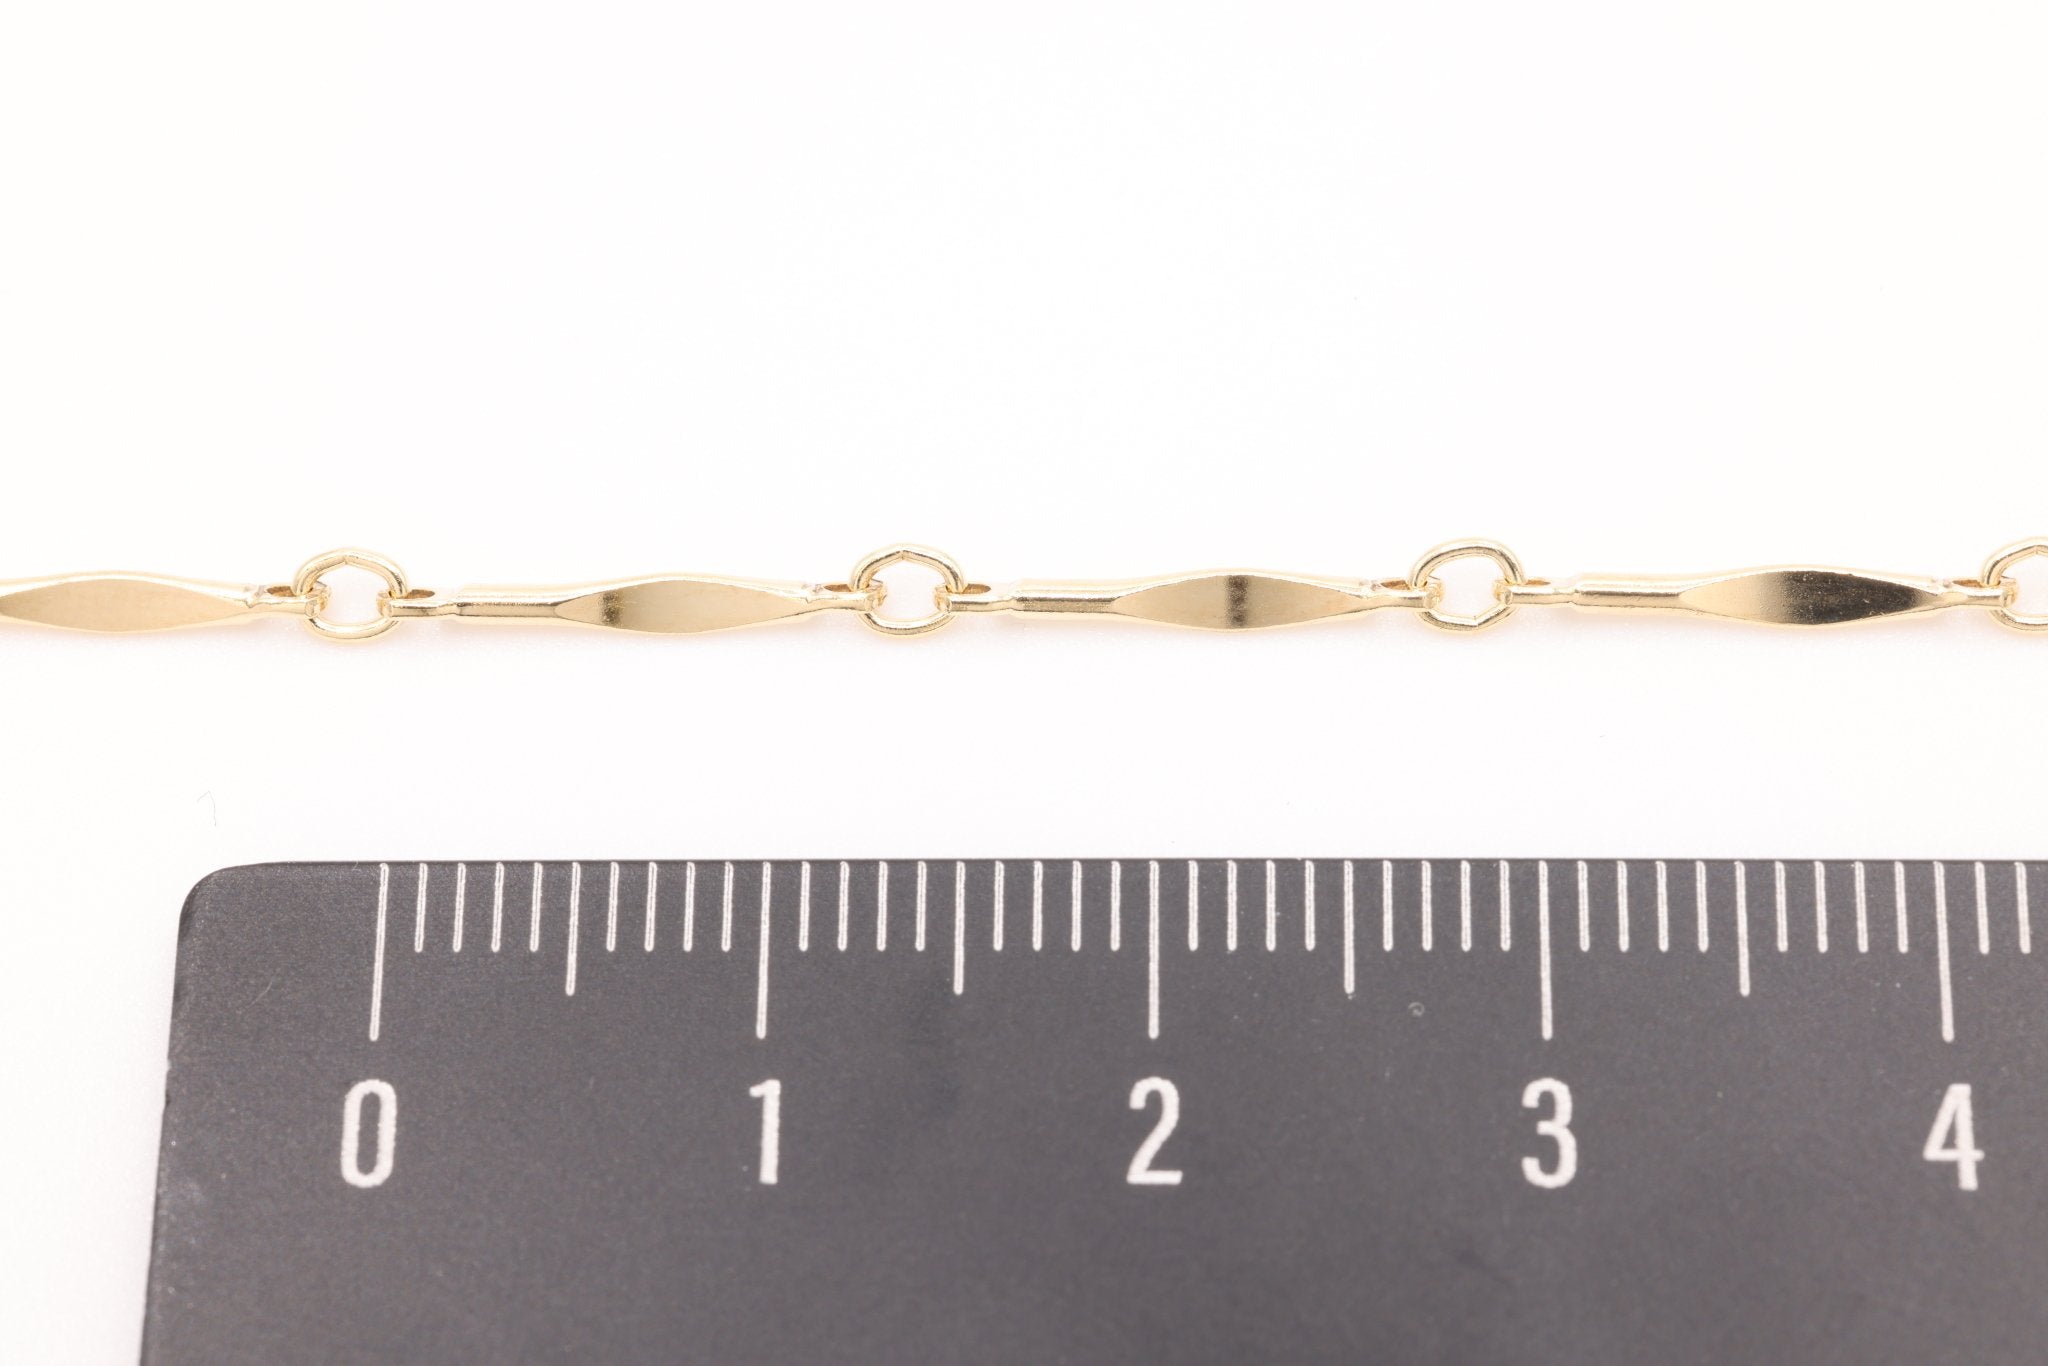 2.5mm x 13mm Marquise Bar Chain, 14K Gold-Filled, Pay Per Foot, Jewelry Making Chain - HarperCrown